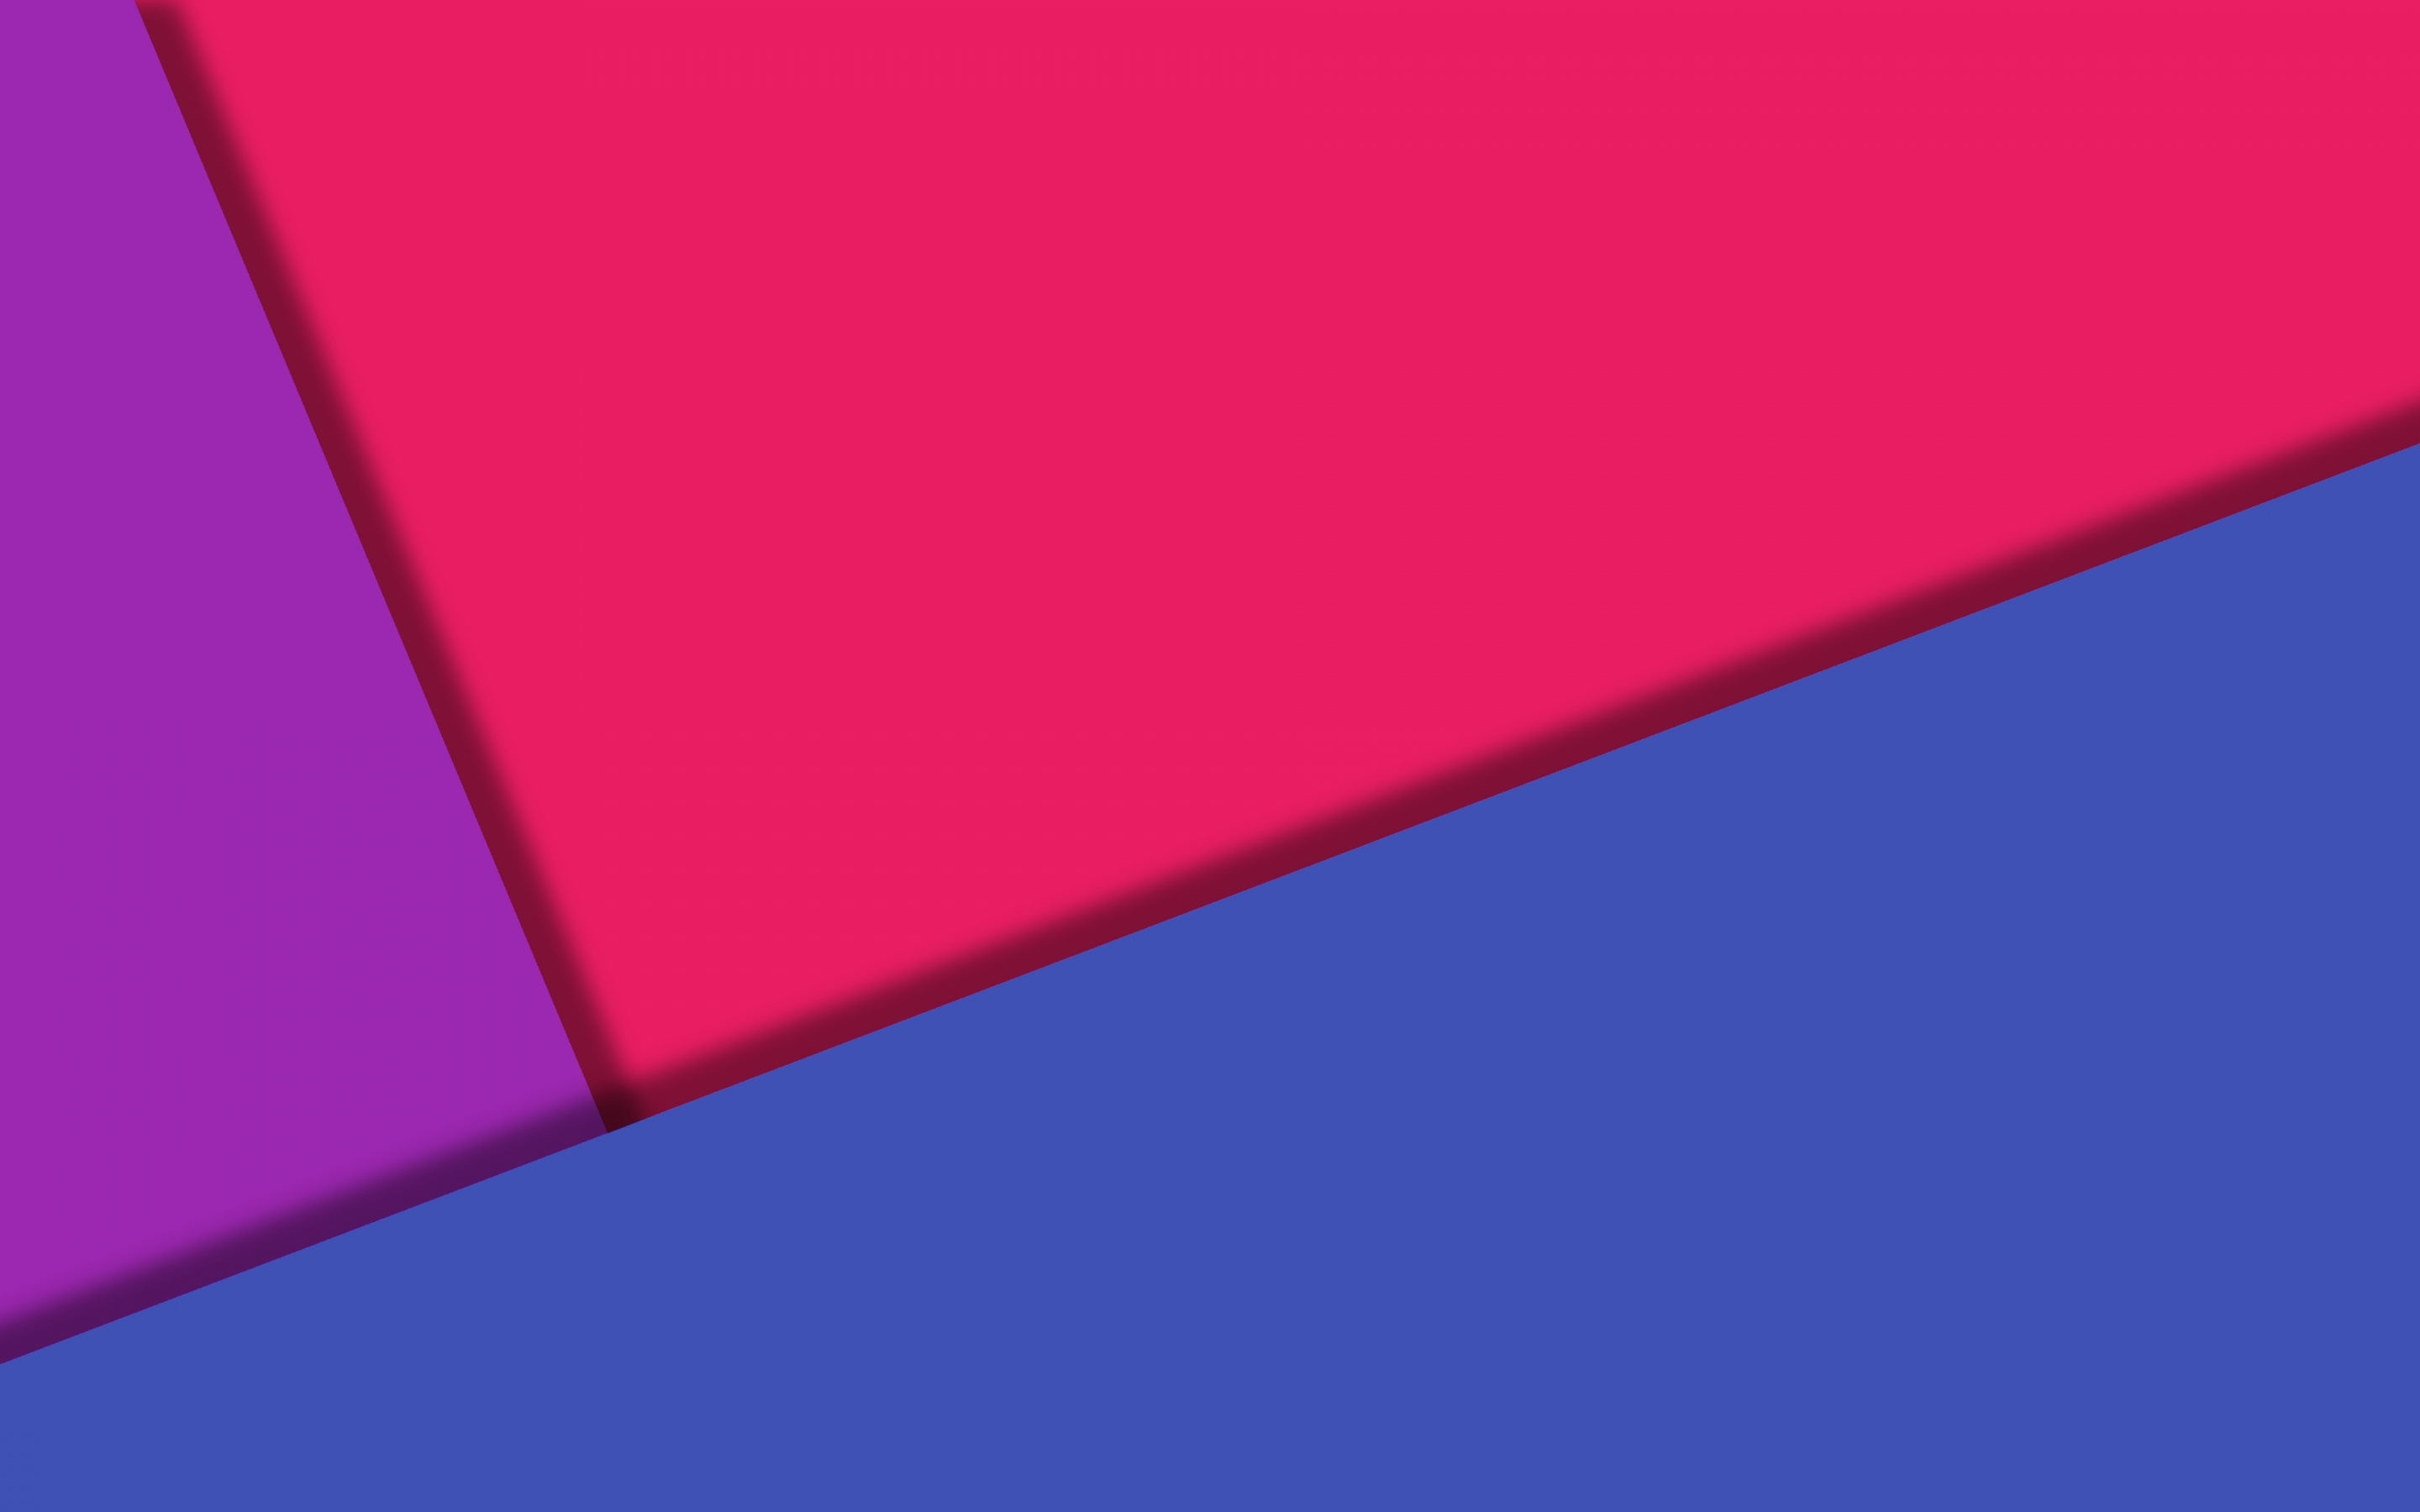 Material design, geometry, abstract, 2880x1800 wallpaper